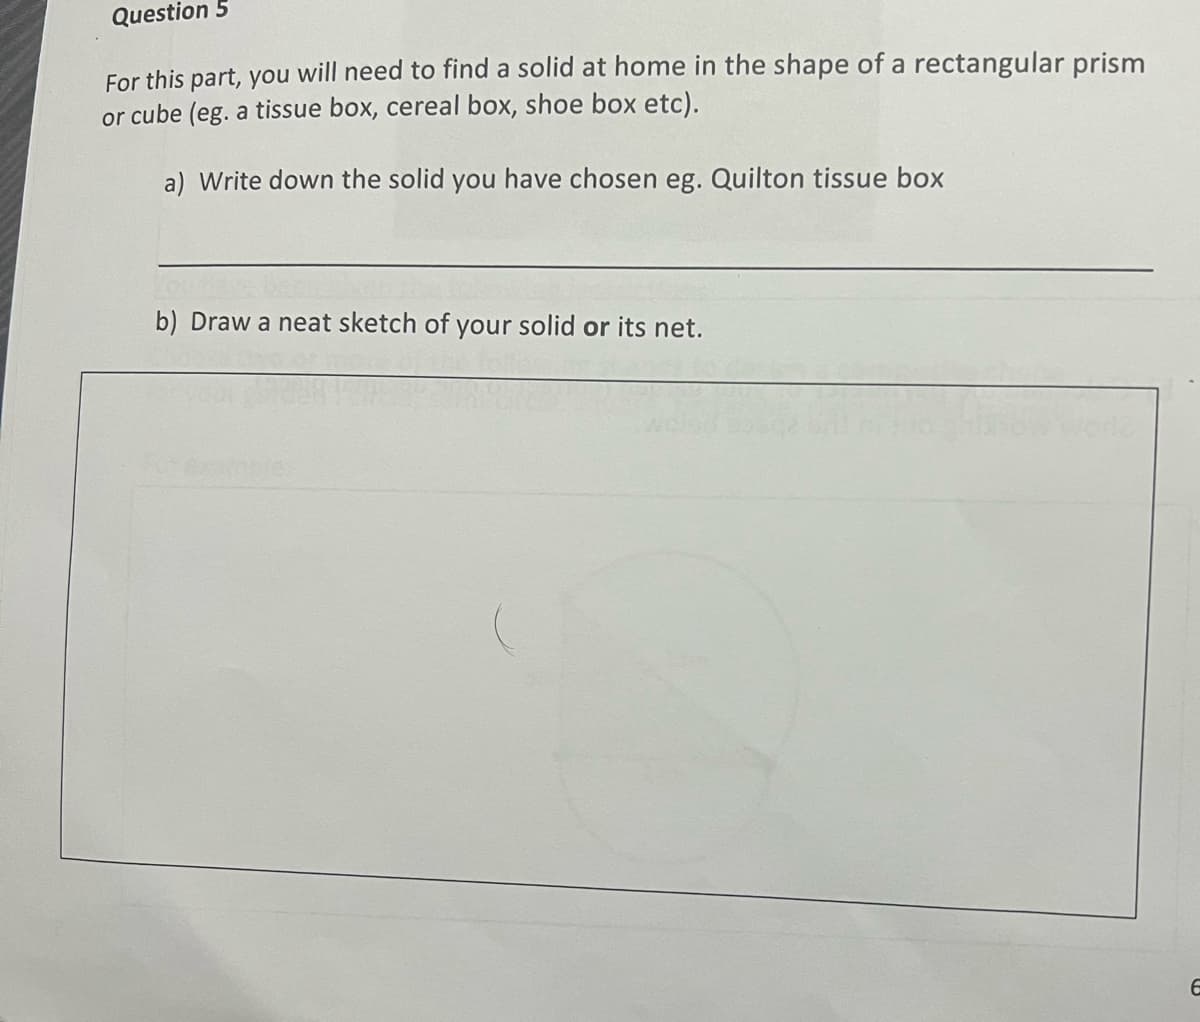 Question 5
For this part, you will need to find a solid at home in the shape of a rectangular prism
or cube (eg. a tissue box, cereal box, shoe box etc).
a) Write down the solid you have chosen eg. Quilton tissue box
b) Draw a neat sketch of your solid or its net.
